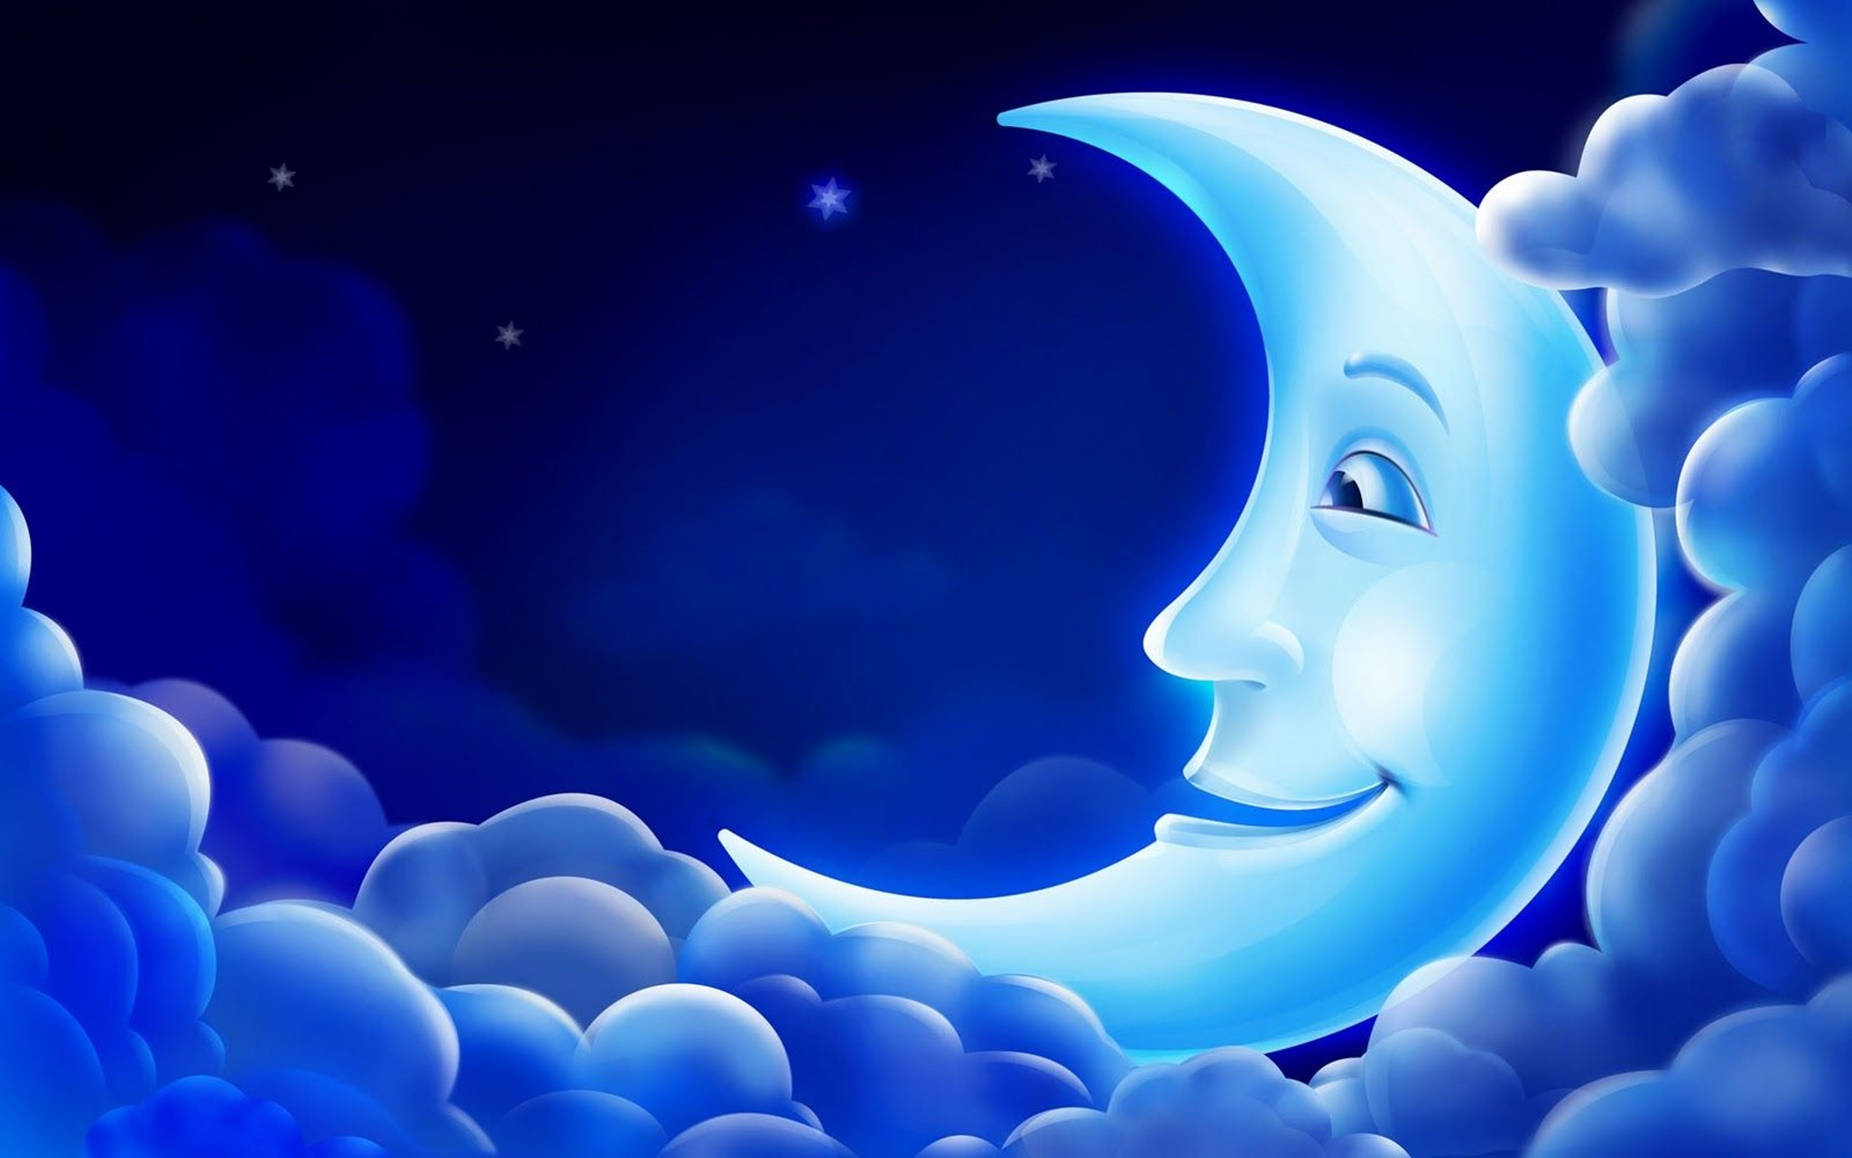 Smiling Crescent Moon 3d Animation Background